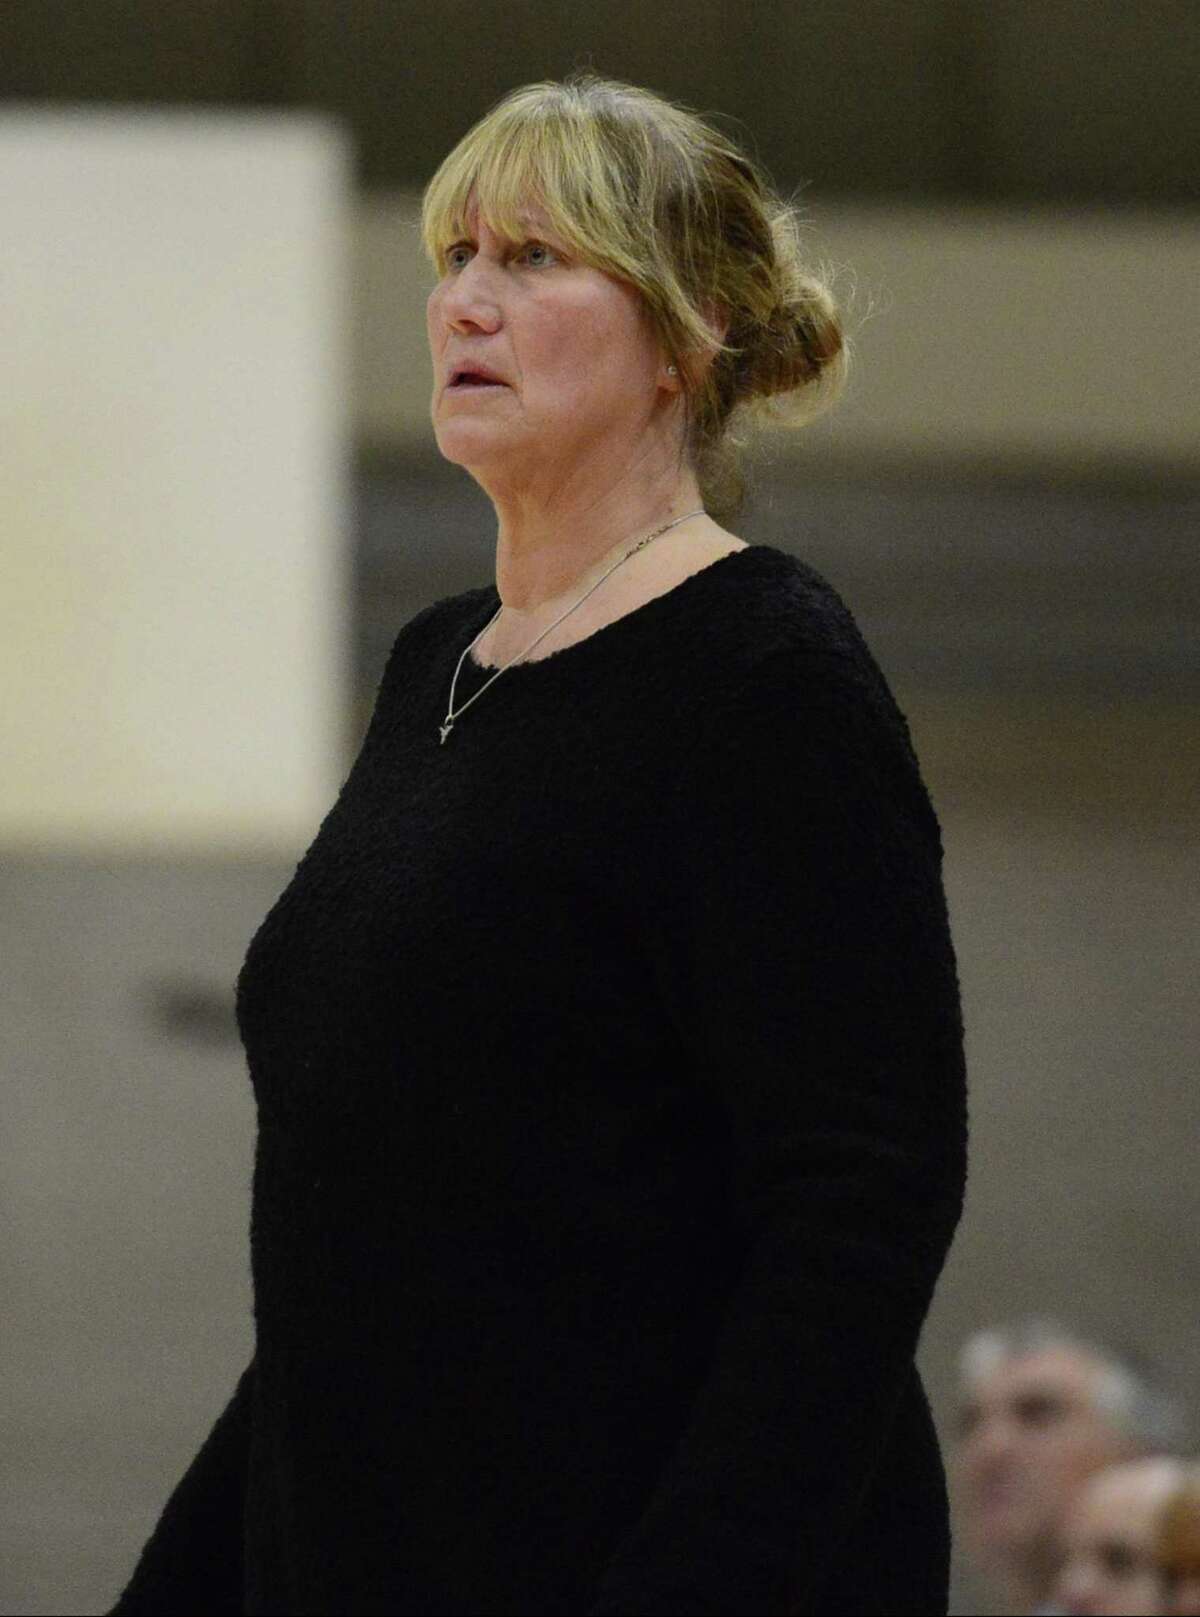 Danbury coach Jackie DiNardo reacts to the action on the court against Stamford during an FCIAC girls basketball game at Stamford High School in Stamford, Conn. on Tuesday, Jan. 30, 2018.